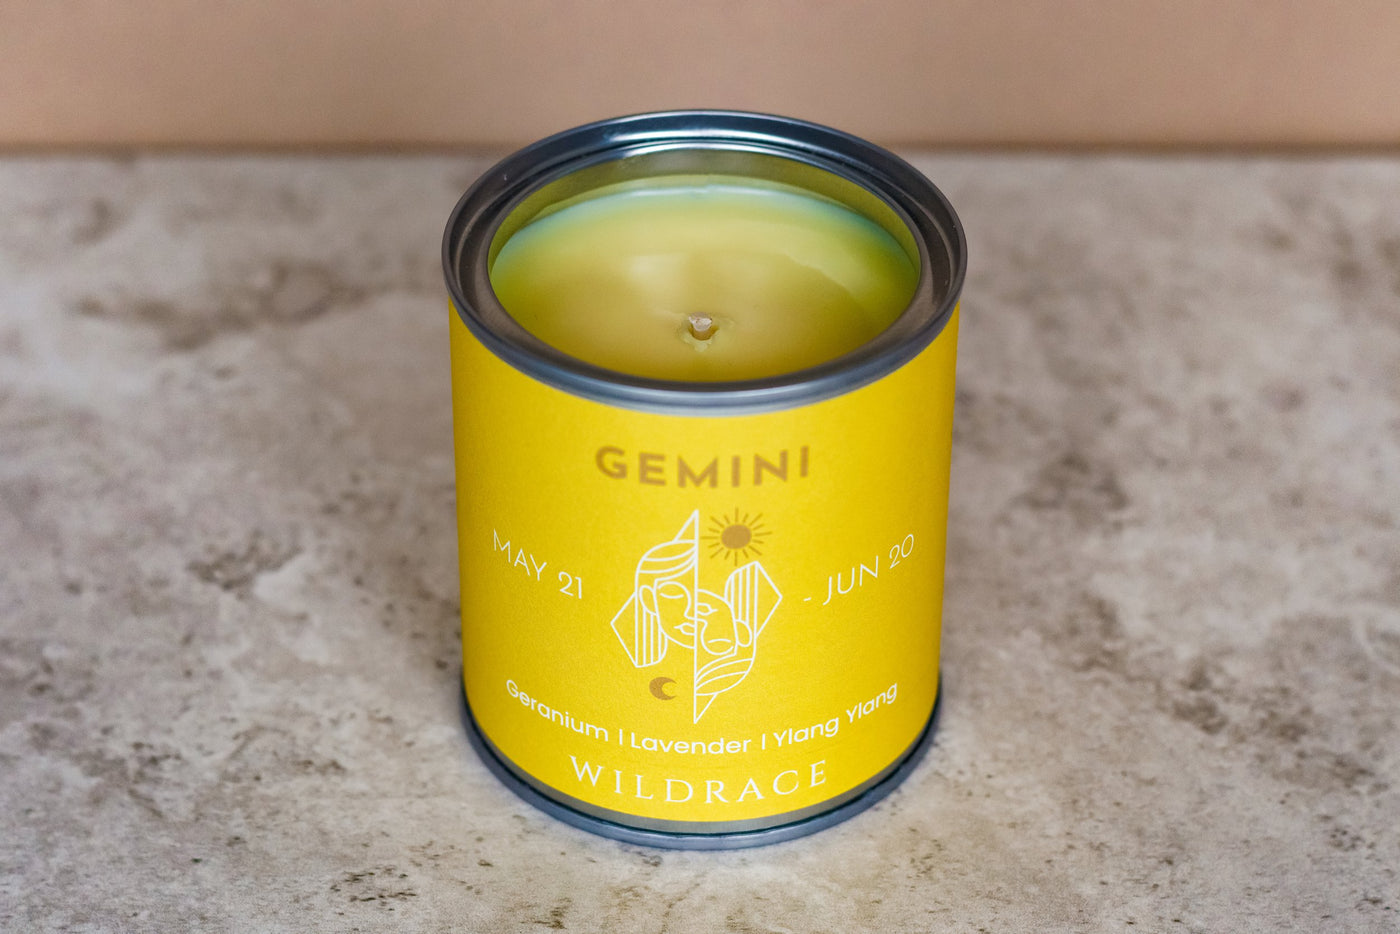 Wildrace Zodiac Collection Gemini Candle - Radical Giving 